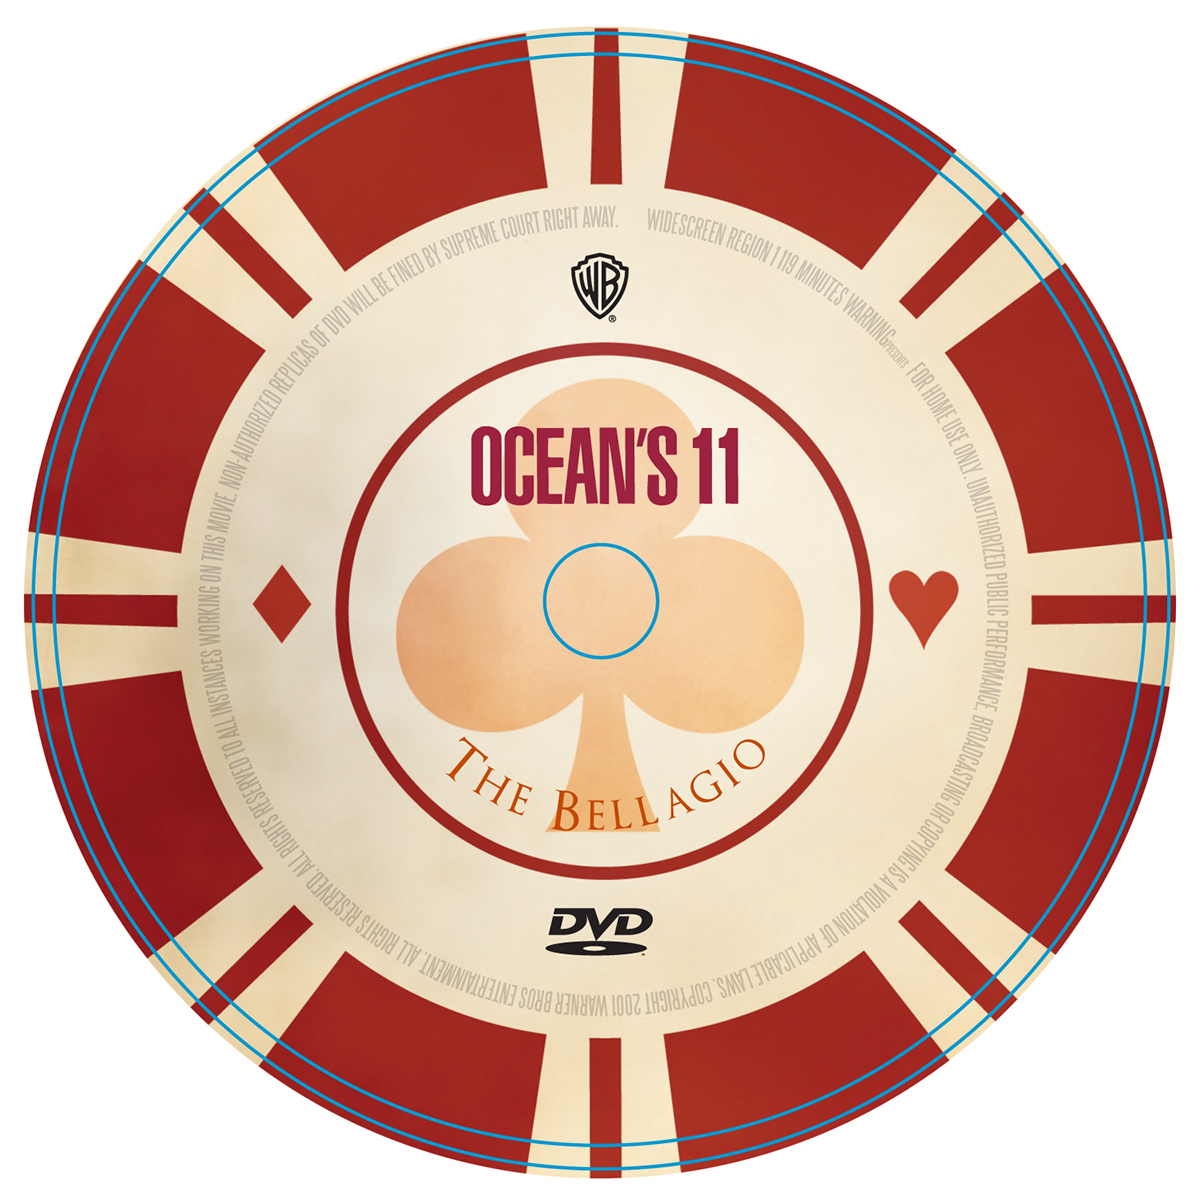 oceans eleven dvd cover disc redisgn brand movie